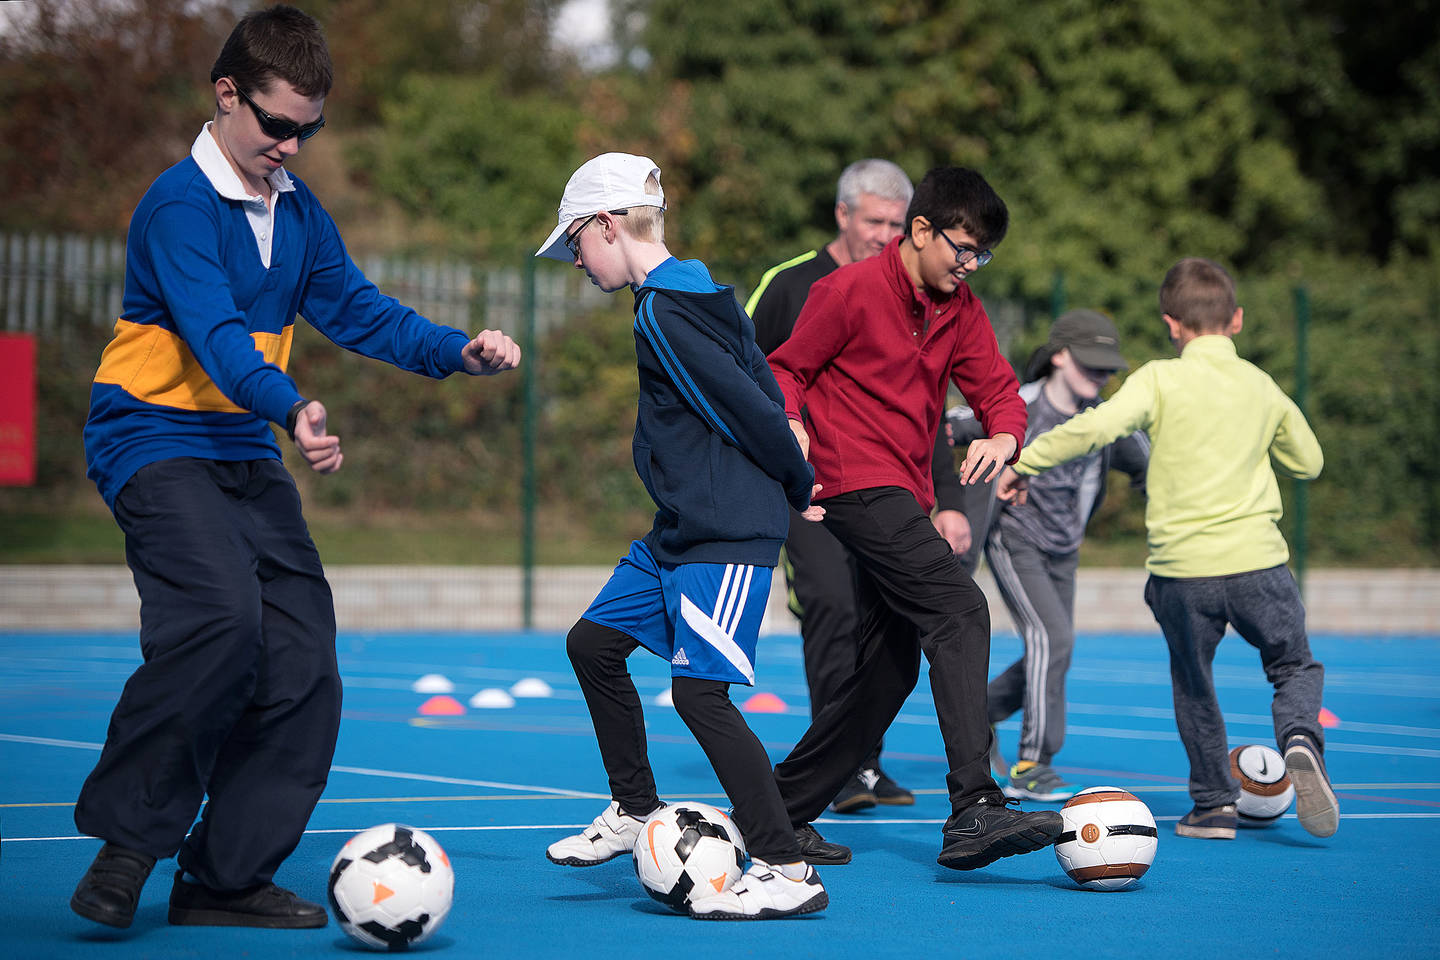 Group of boys with visual impairments taking part in football drills. Photo credit: British Blind Sport